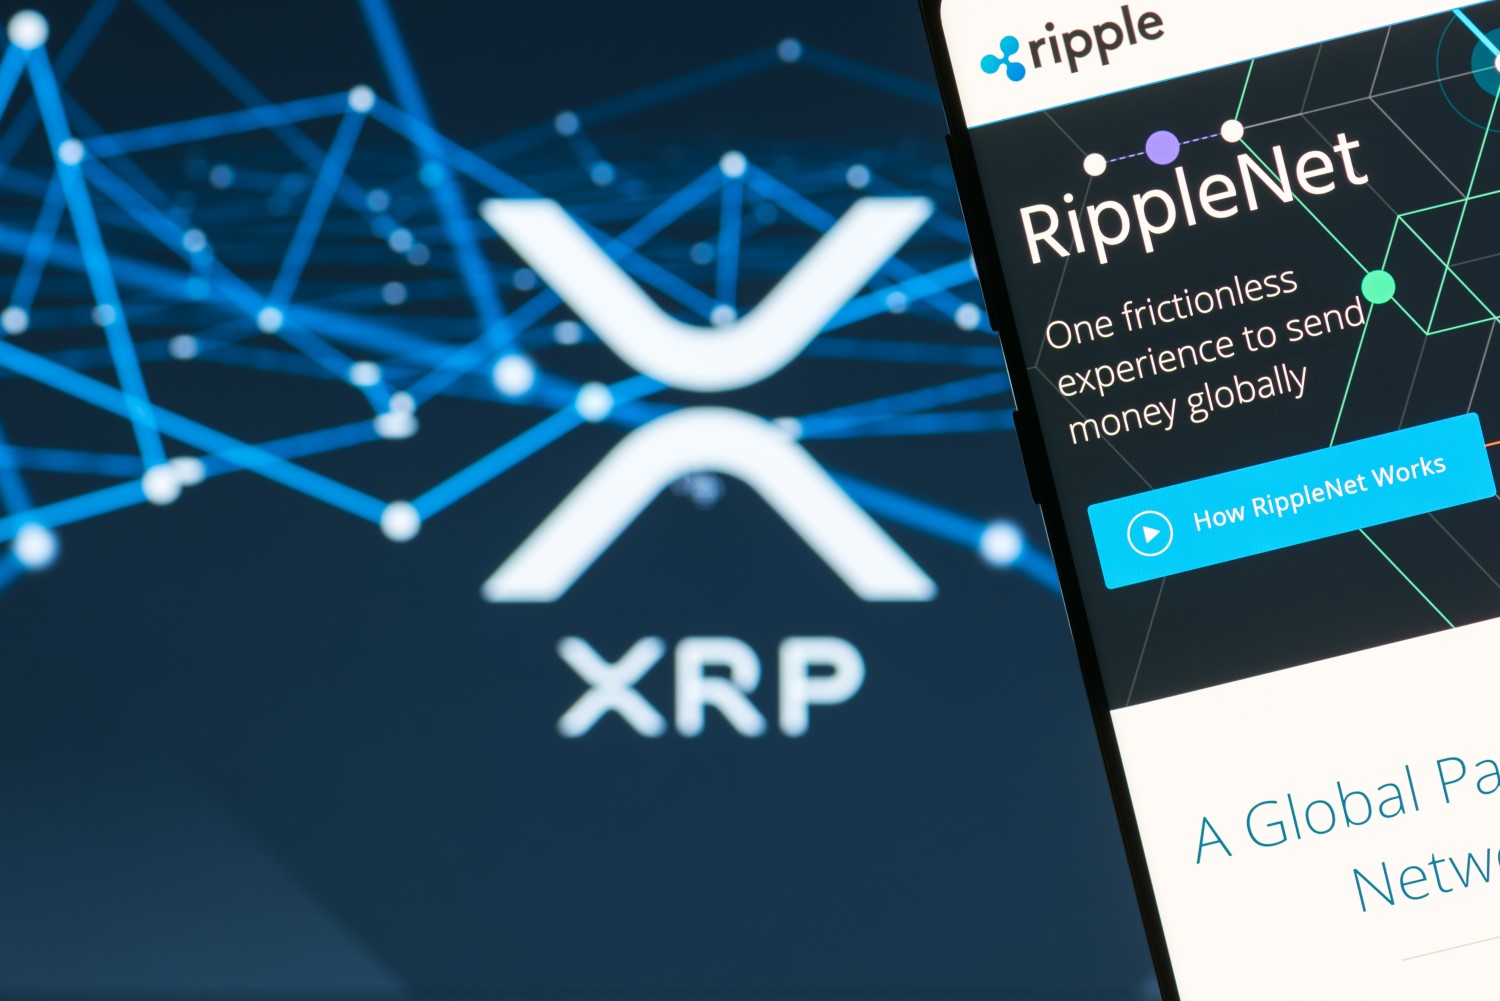 Ripple Says Sales Of XRP Cryptocurrency Grew 31% In Q1